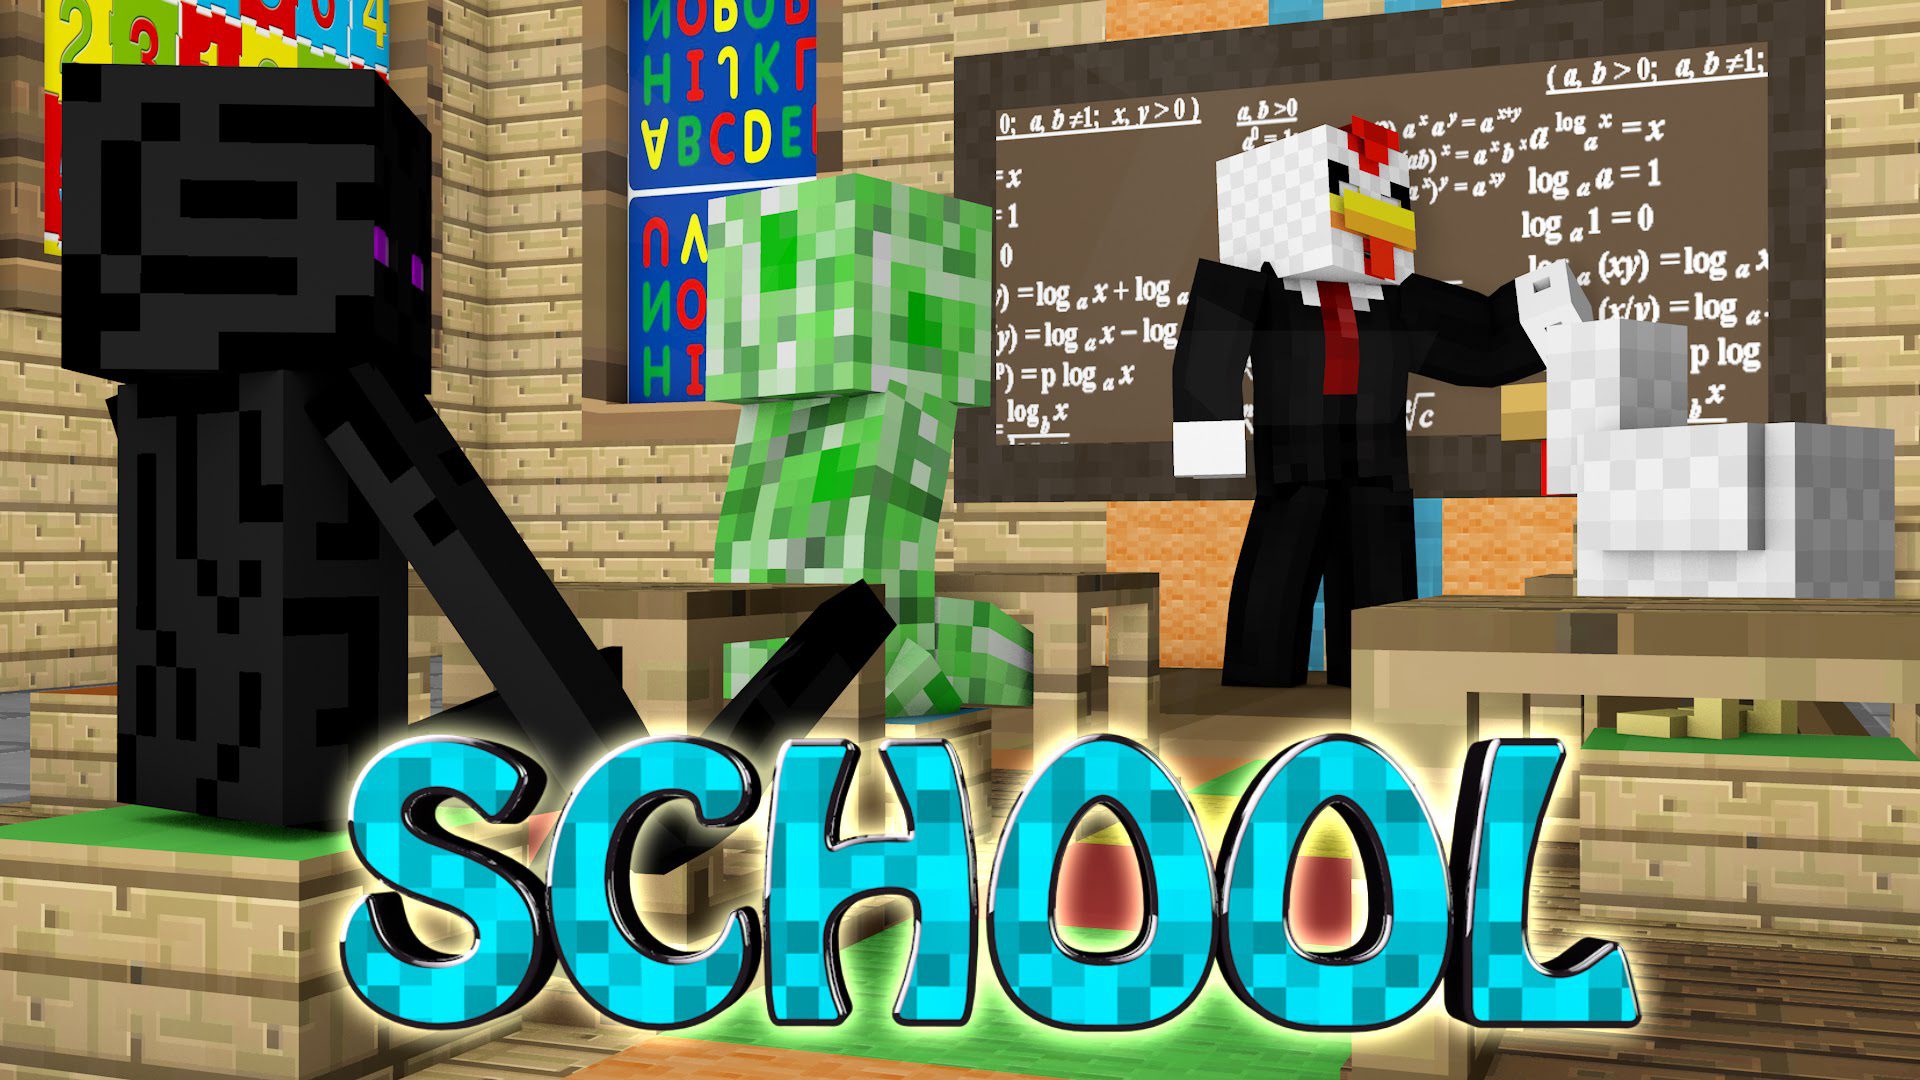 Another School Mod